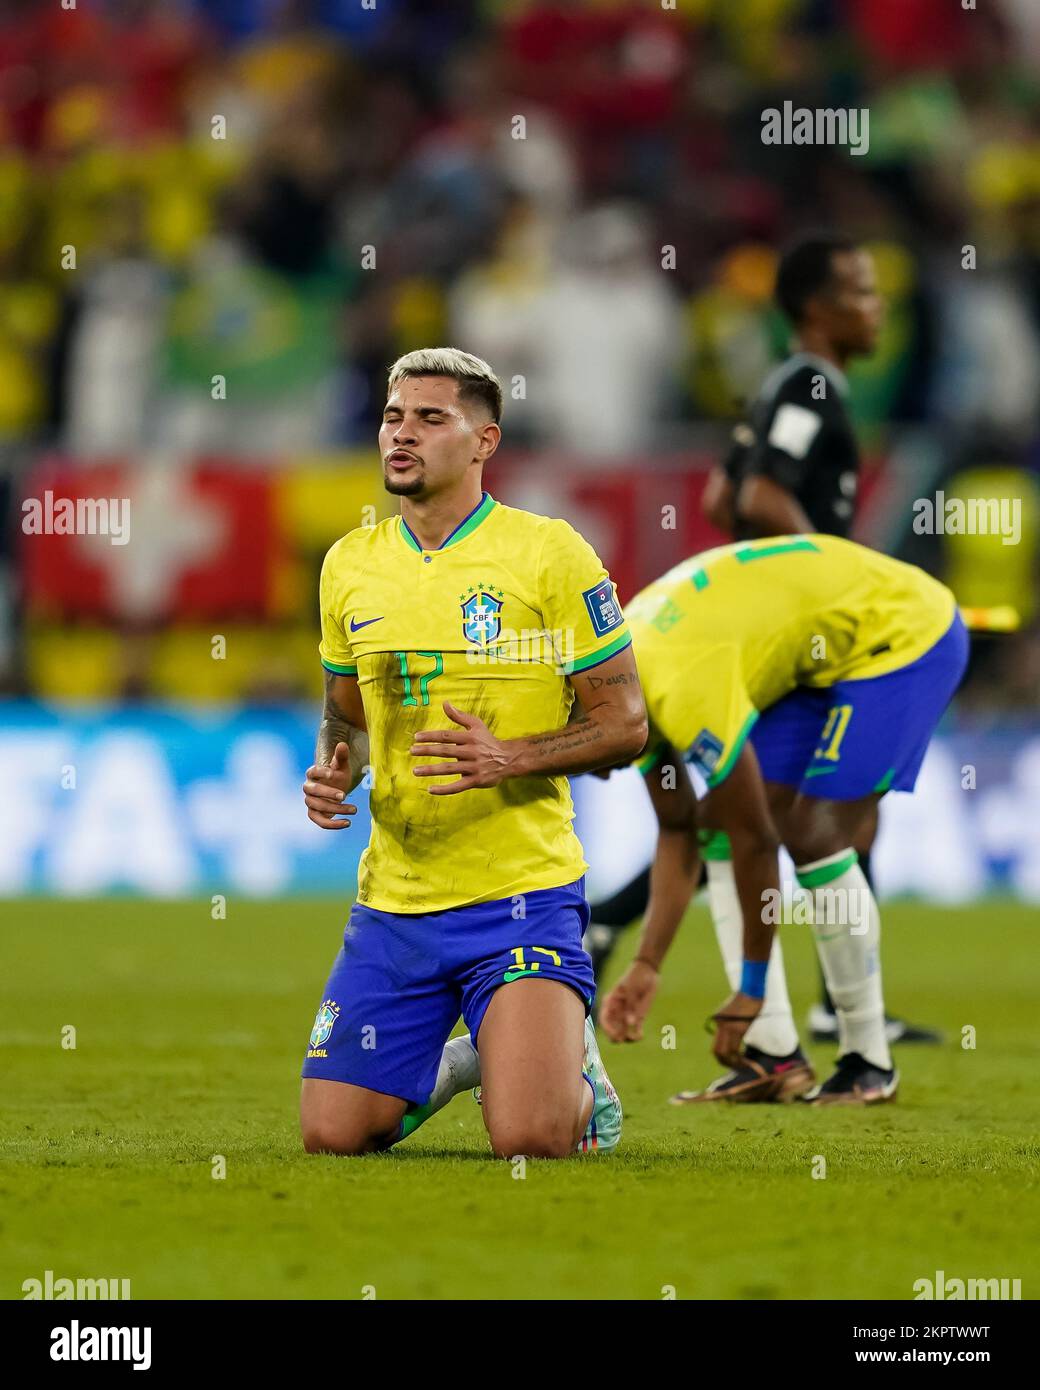 DOHA, QATAR - NOVEMBER 28: Player of Brazil Bruno Guimarães reacts after the FIFA World Cup Qatar 2022 group G match between Brazil and Switzerland at Stadium 974 on November 28, 2022 in Doha, Qatar. (Photo by Florencia Tan Jun/PxImages) Stock Photo